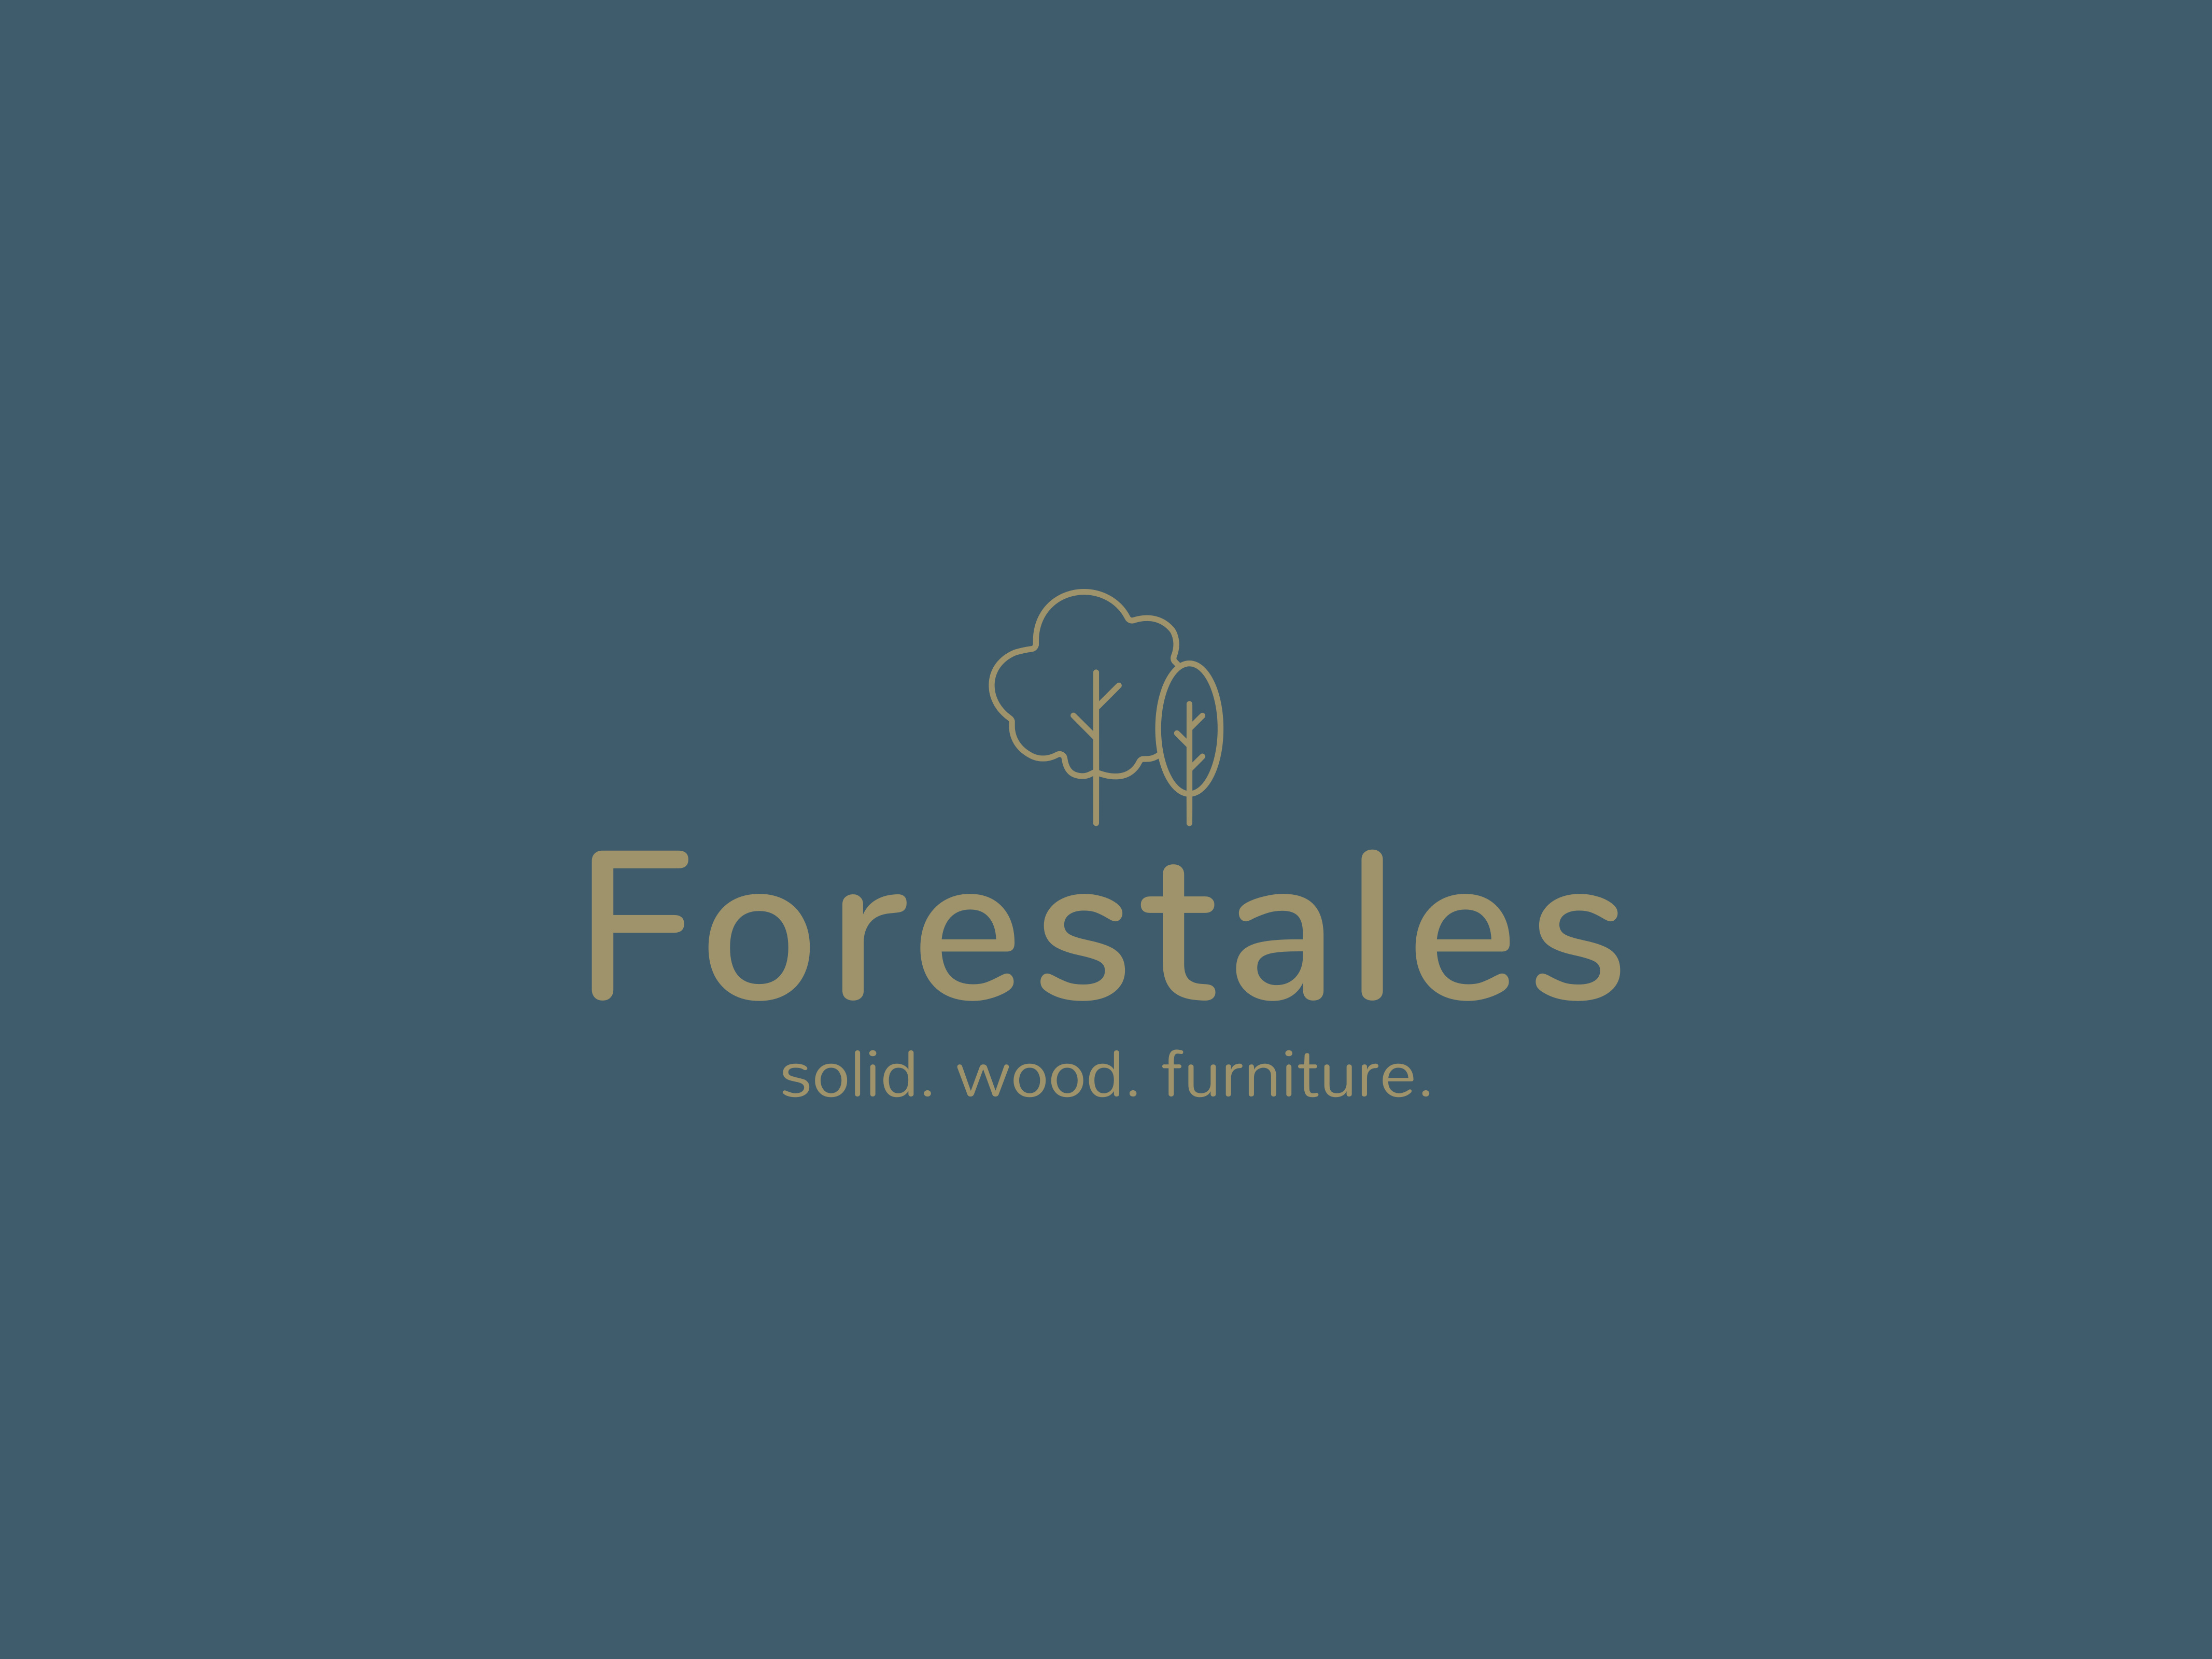 Forestales